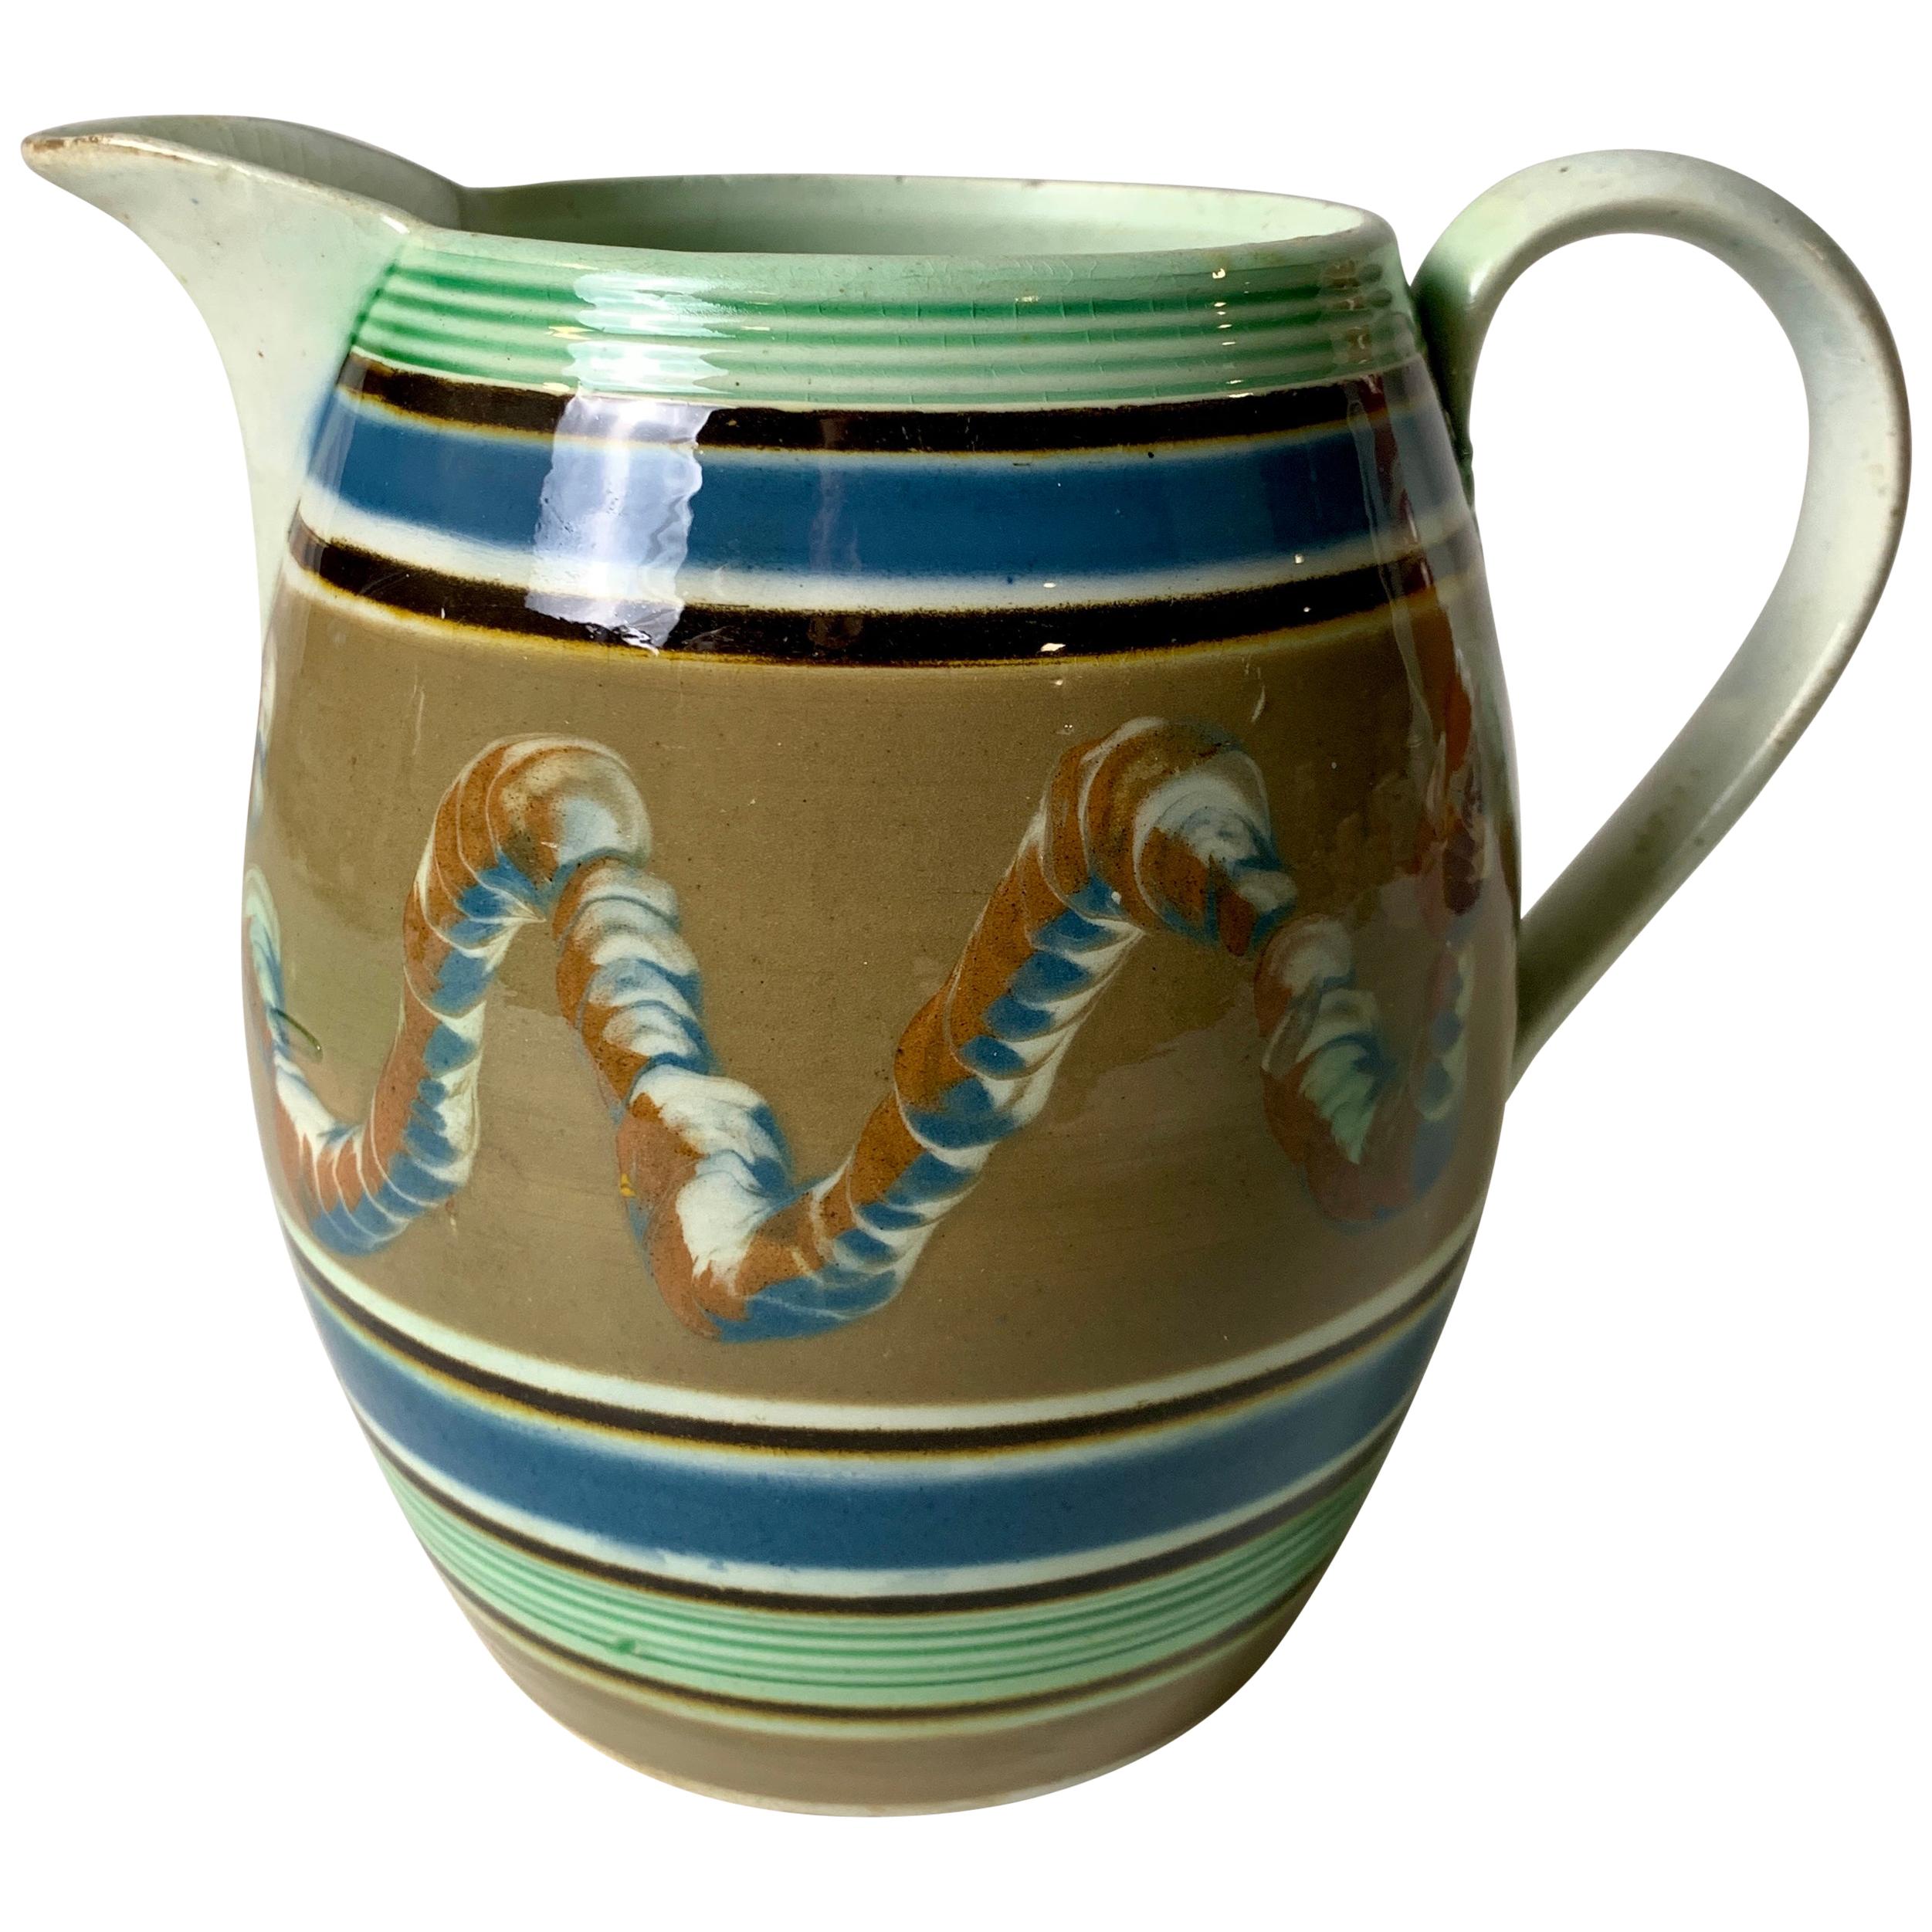 Mochaware Pitcher Decorated with Soft Blue Green & Brown Made England, c- 1820